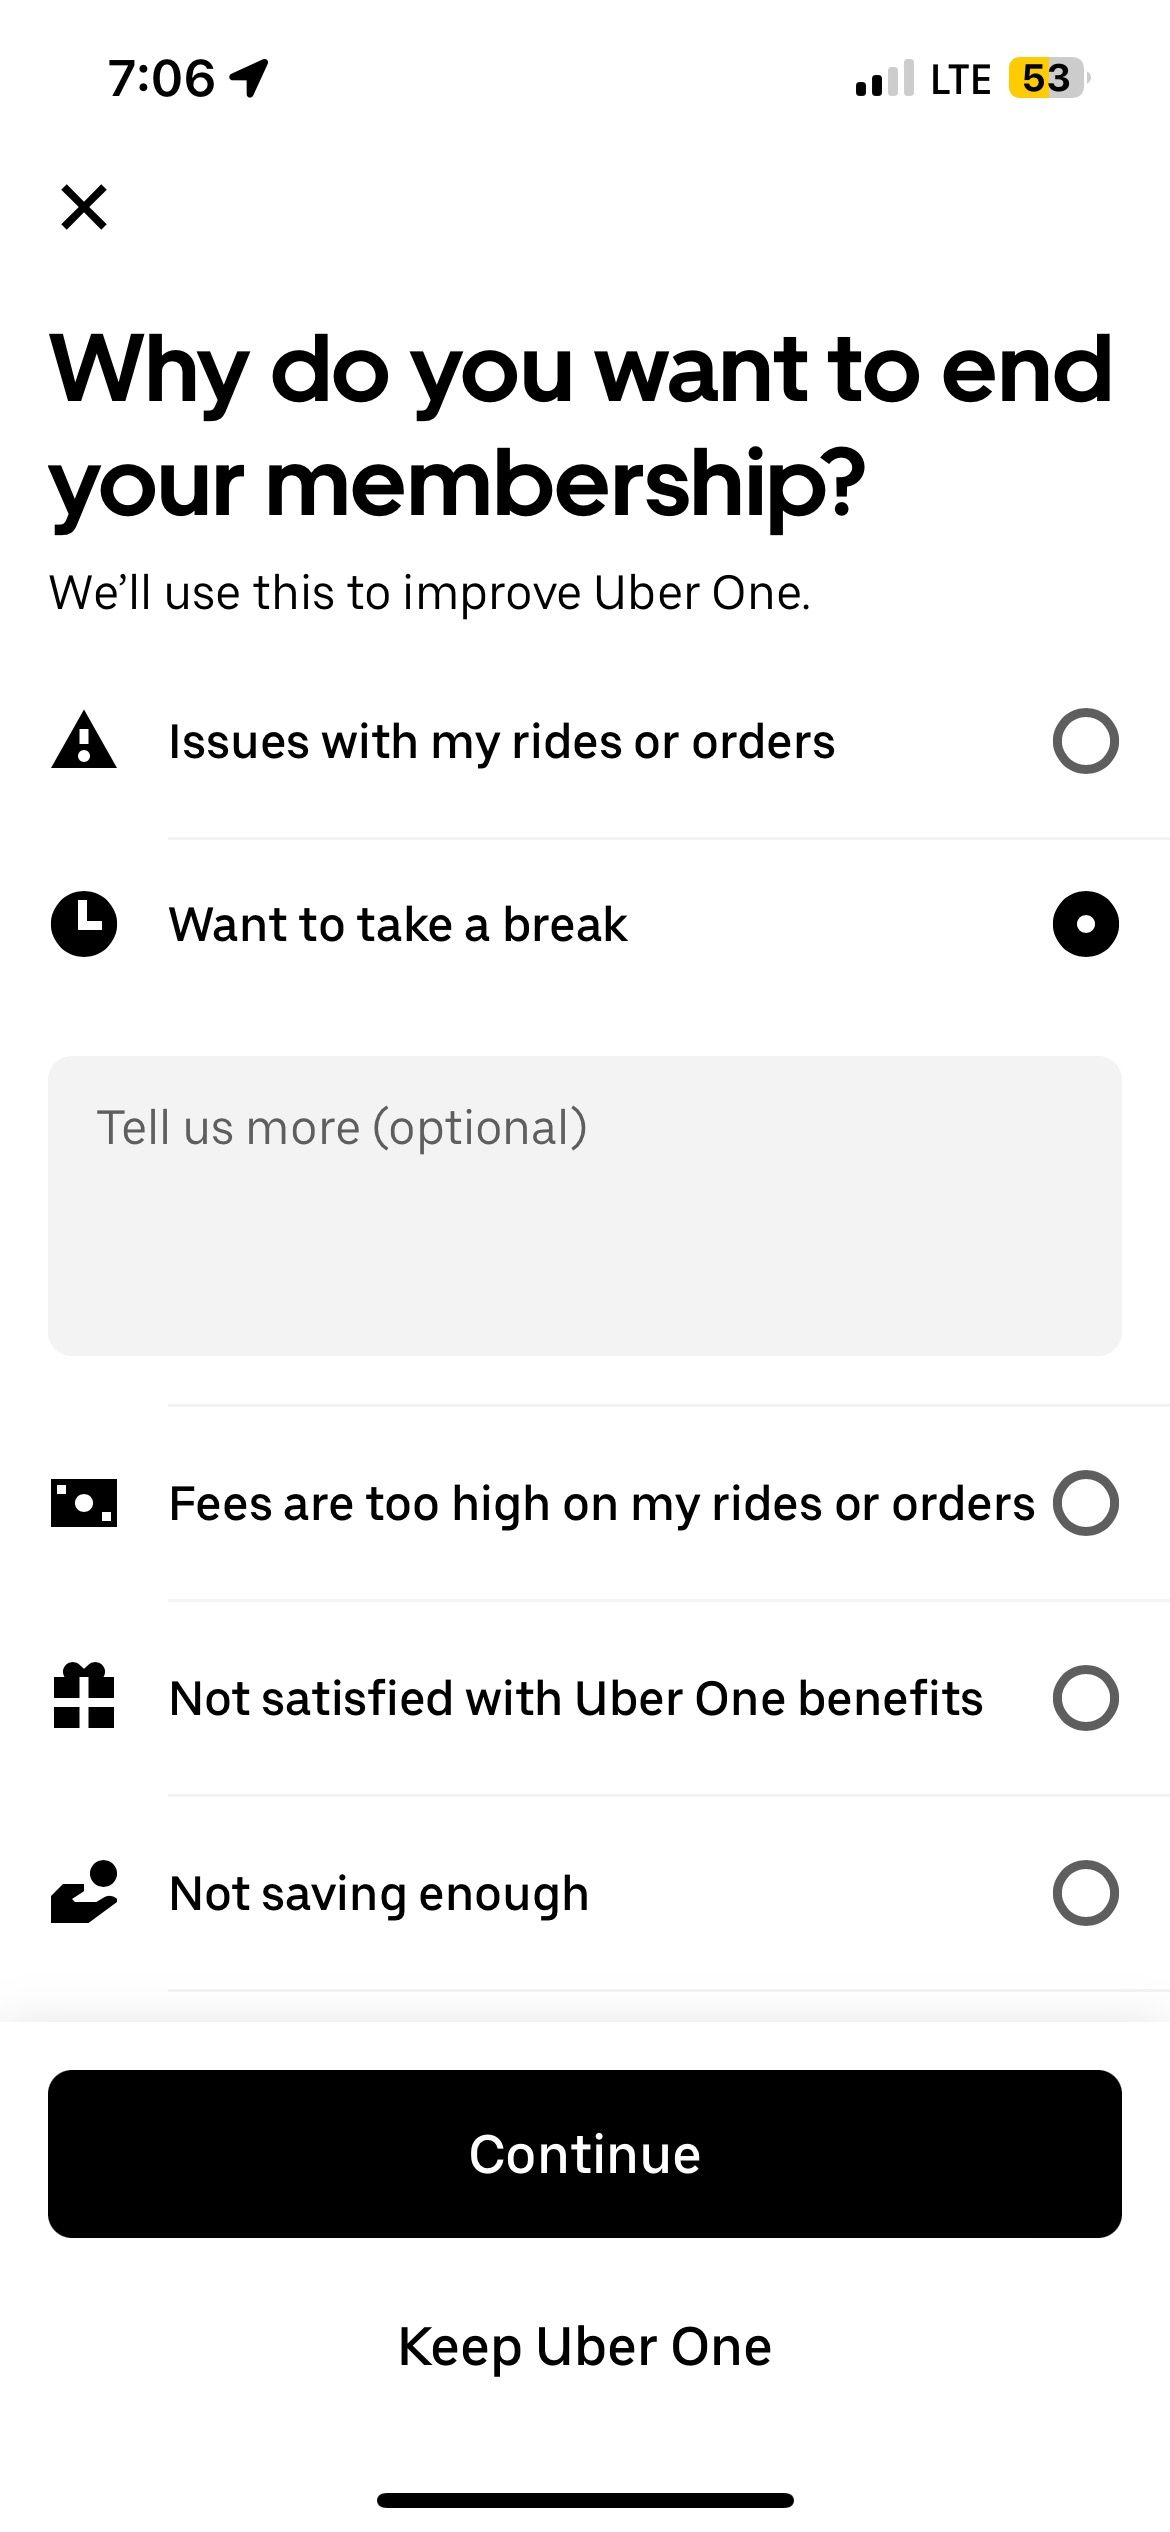 What Is Uber One, and What Are Its Benefits?